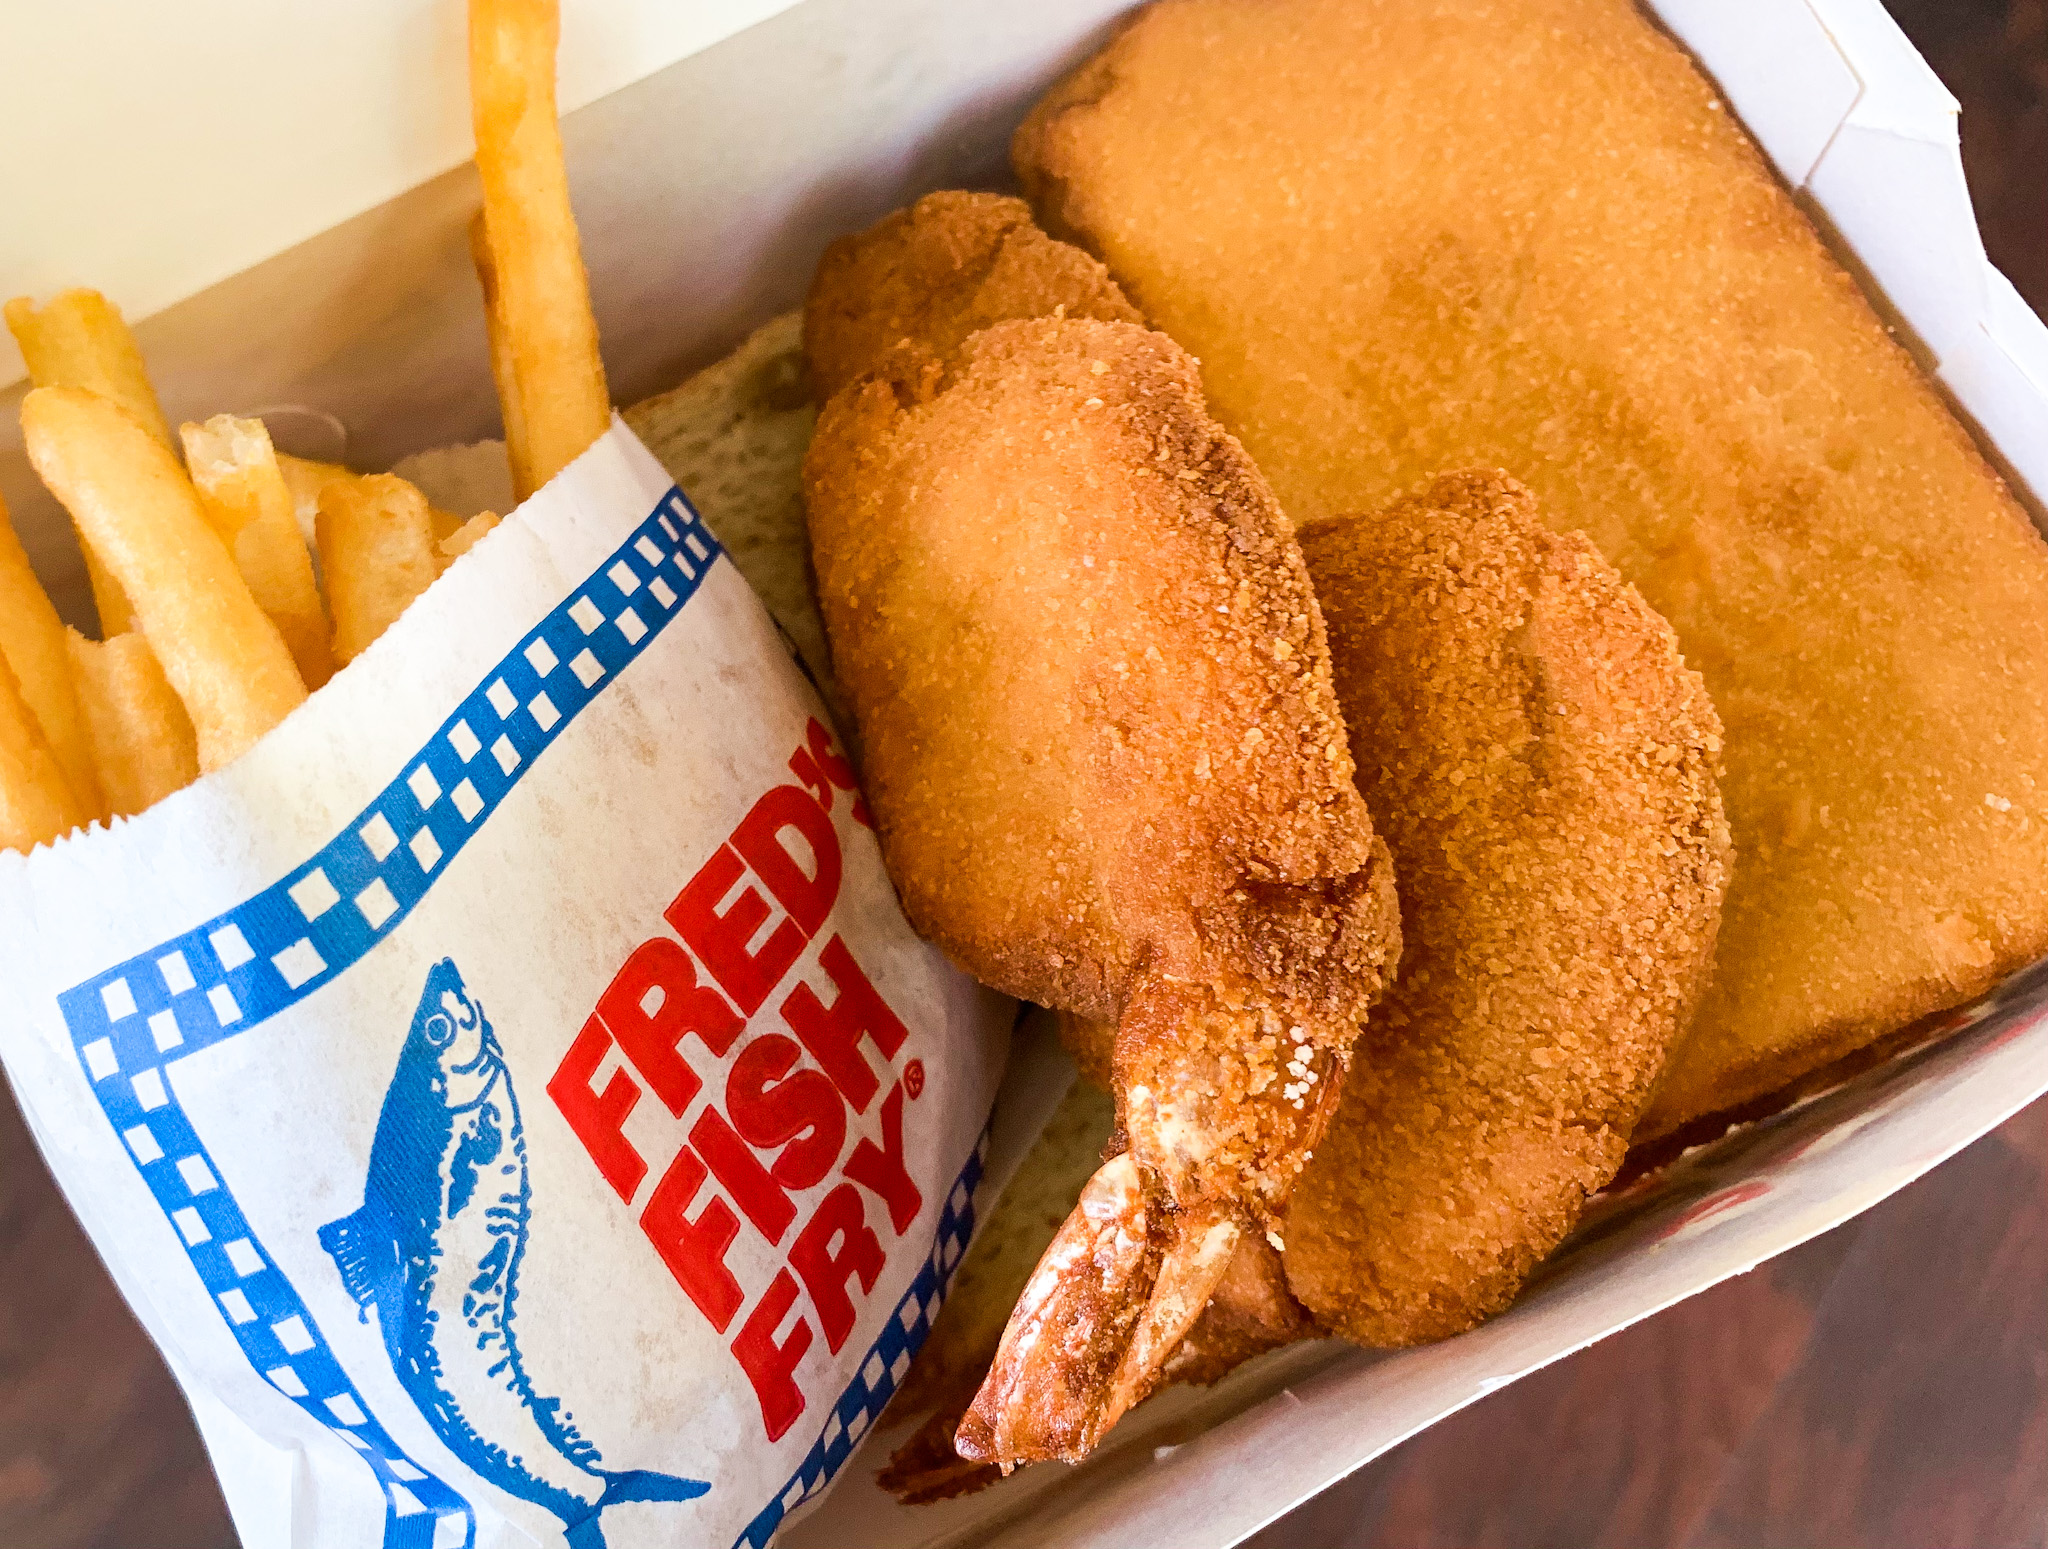 Here's how I razzle dazzled my Fred's Fish Fry order